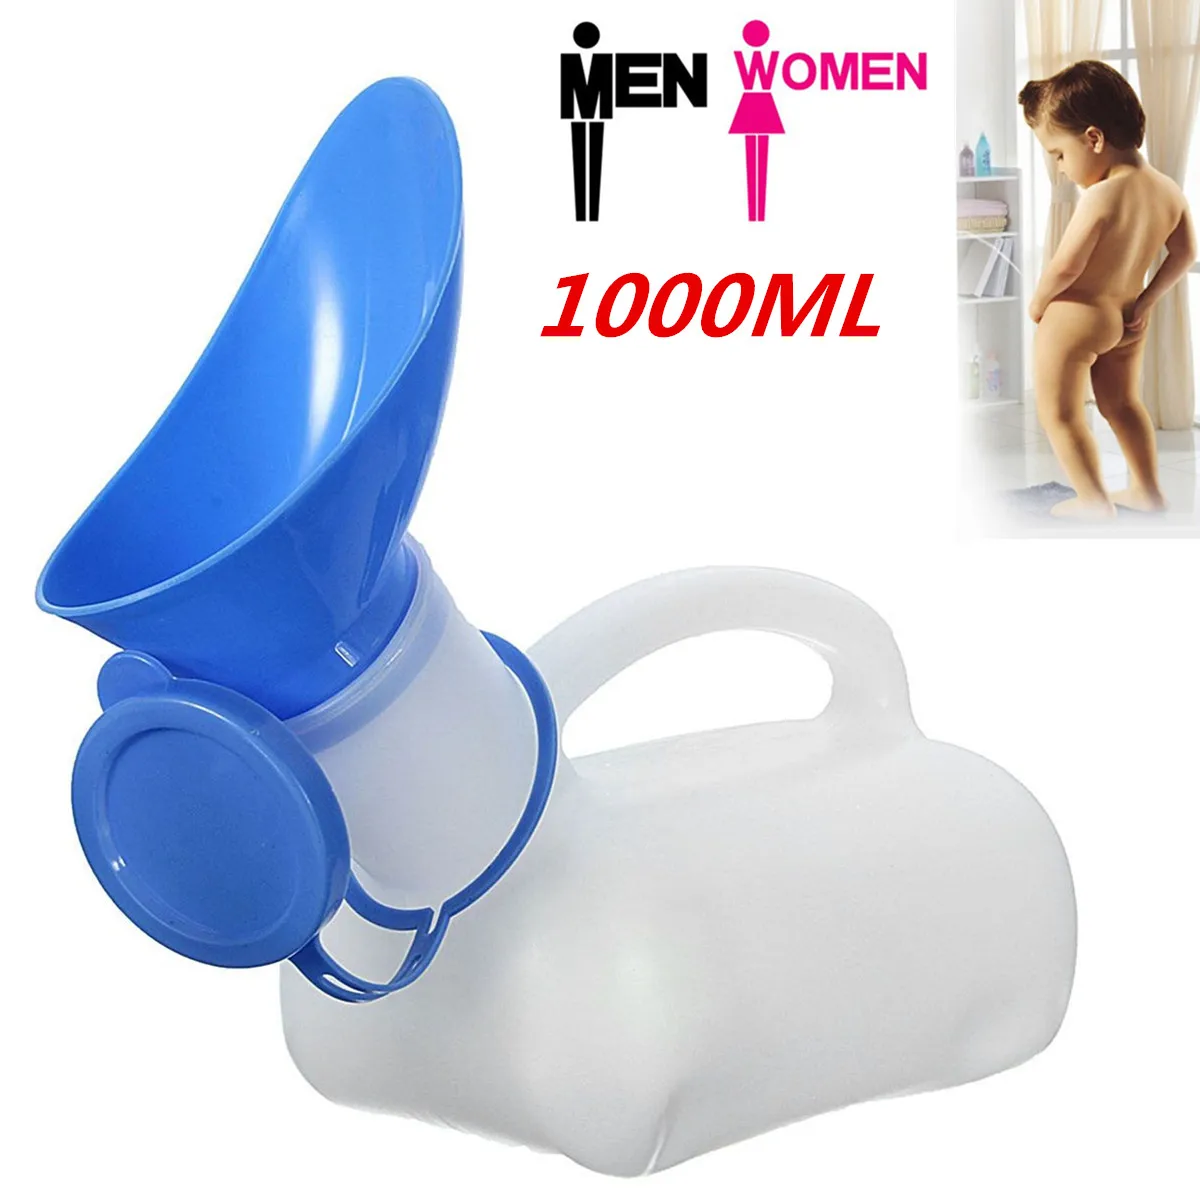 Car Mobile Toilet,Portable Urinal for Camping Outdoor Travel with a Lid Woman Urine collector,Potty Urinal,Bedpans Pee Bottle